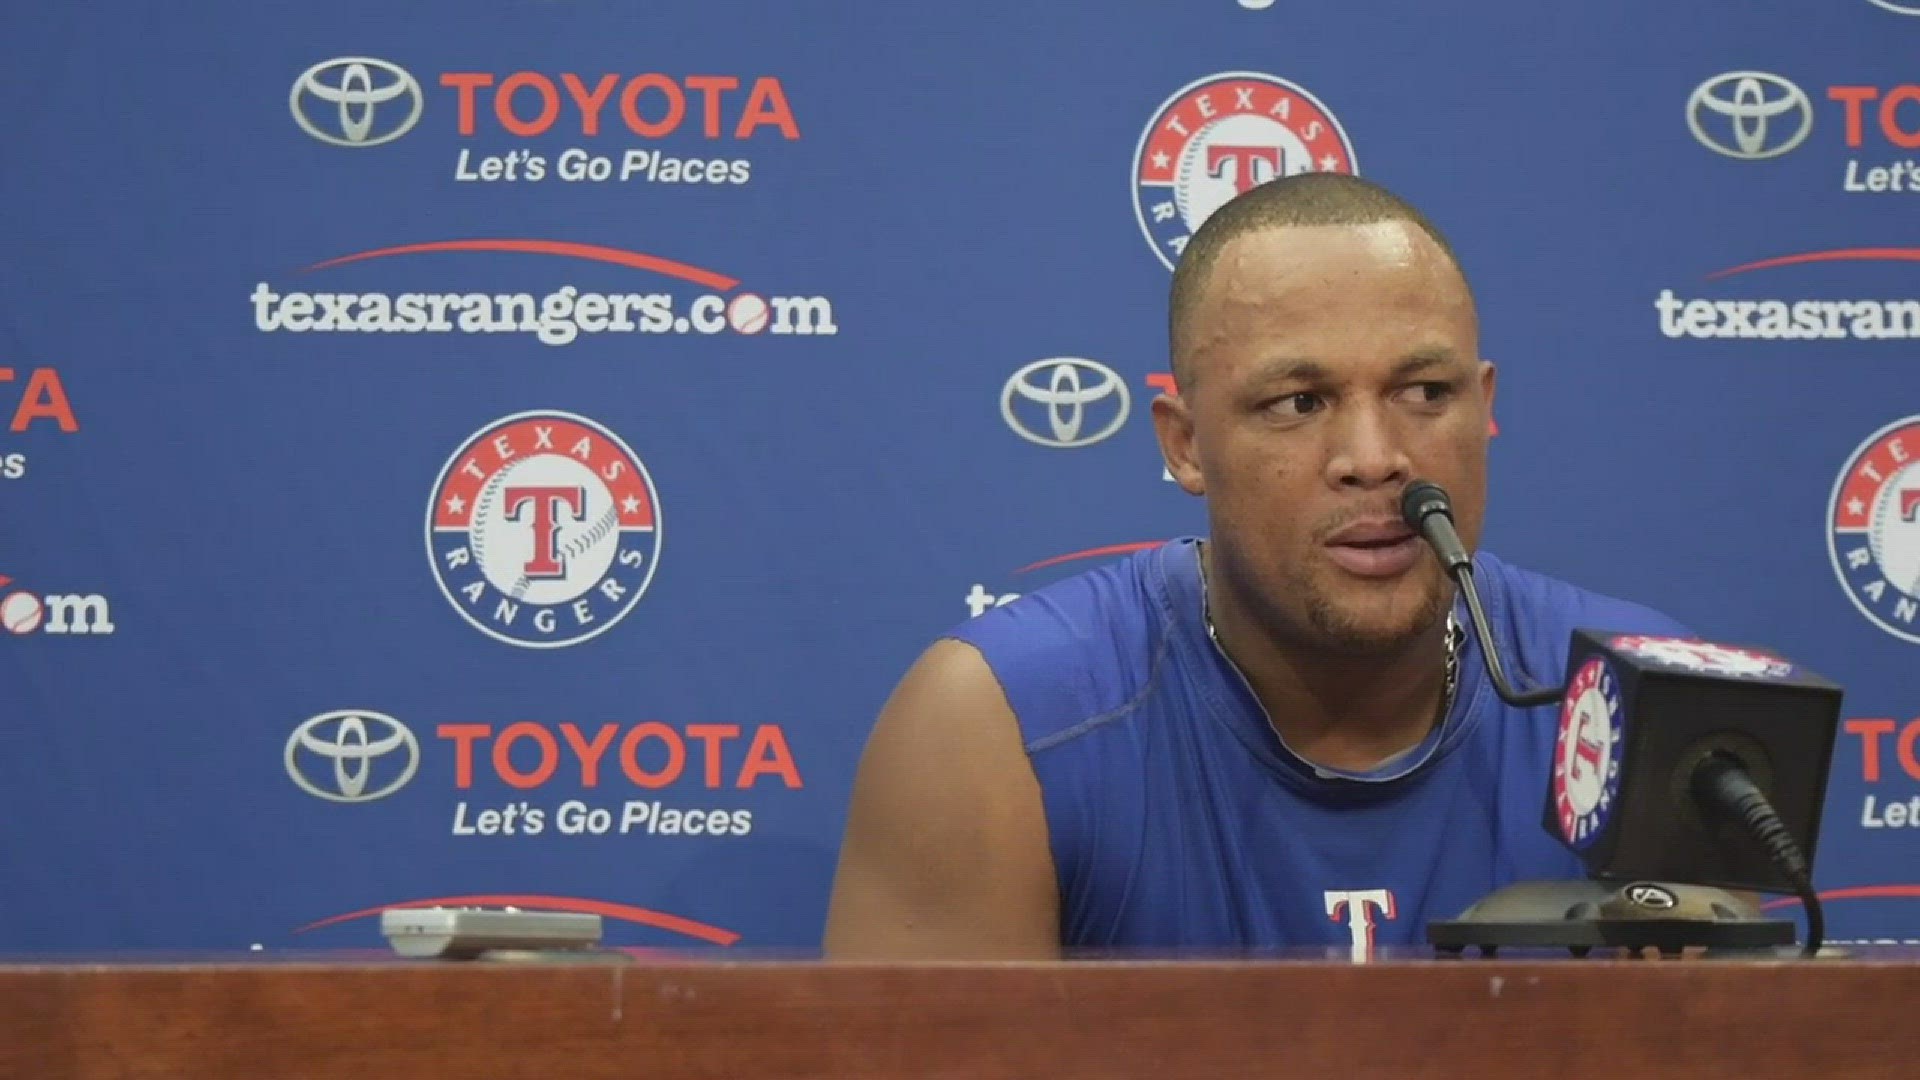 Adrian Beltre discusses how he felt seeing his family on the field after his 3,000th hit.